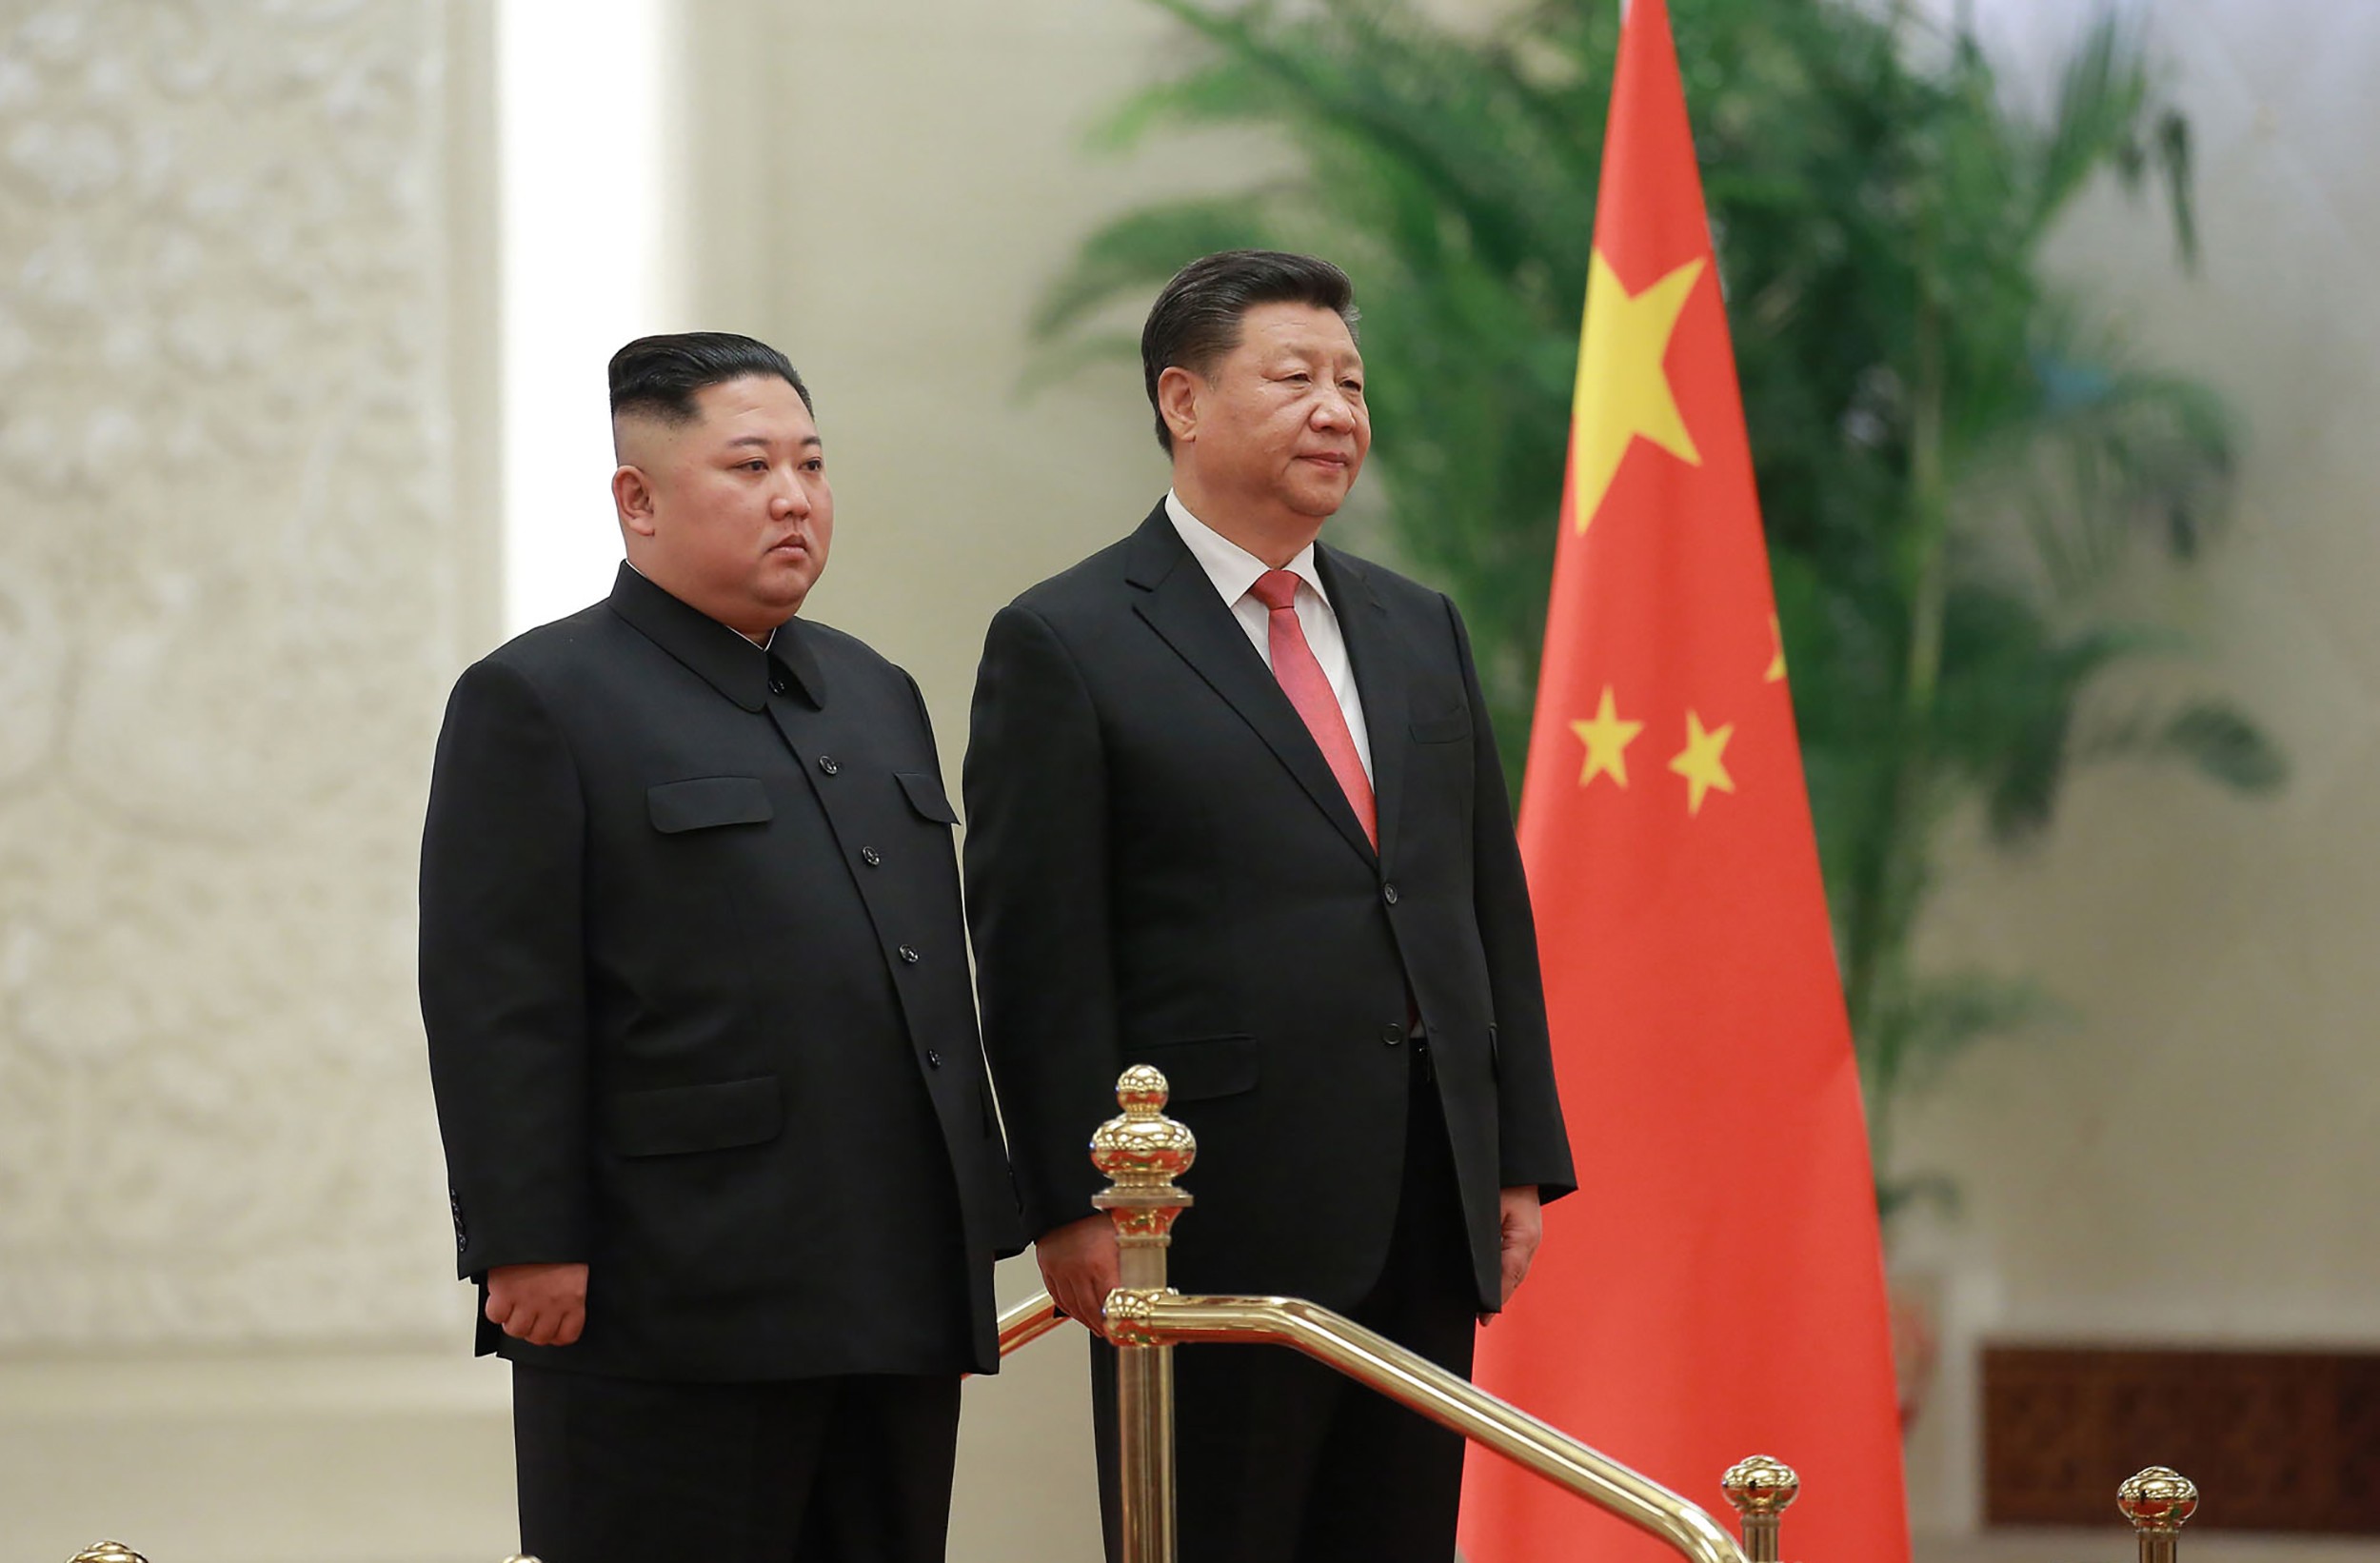 North Korea's leader Kim Jong-un stands alongside China's President Xi Jinping during a welcome ceremony at the Great Hall of the People in Beijing on January 8. Photo: KCNA via KNS/AFP